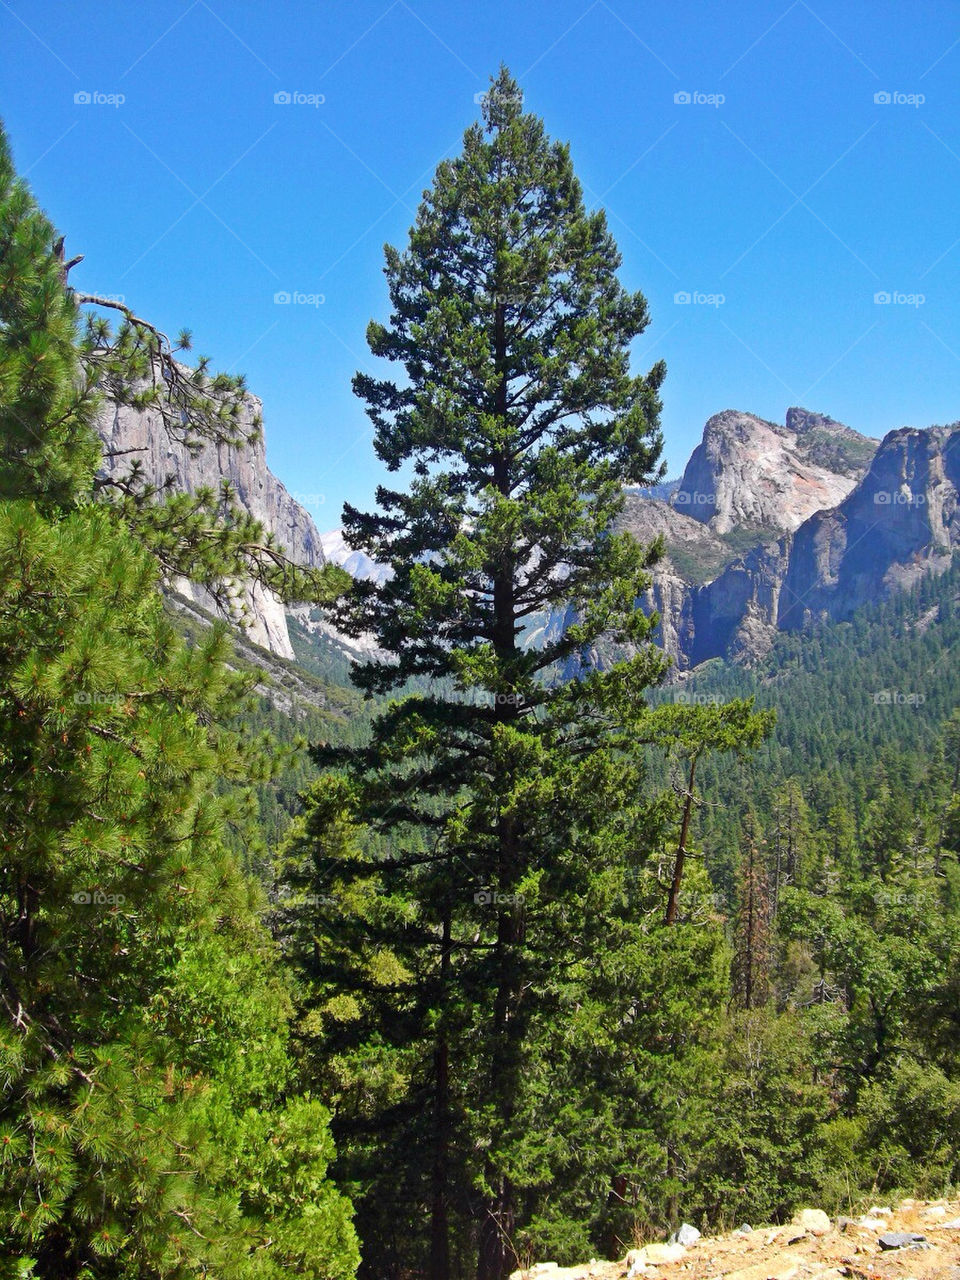 trees park usa mountains by tommygirl-uk